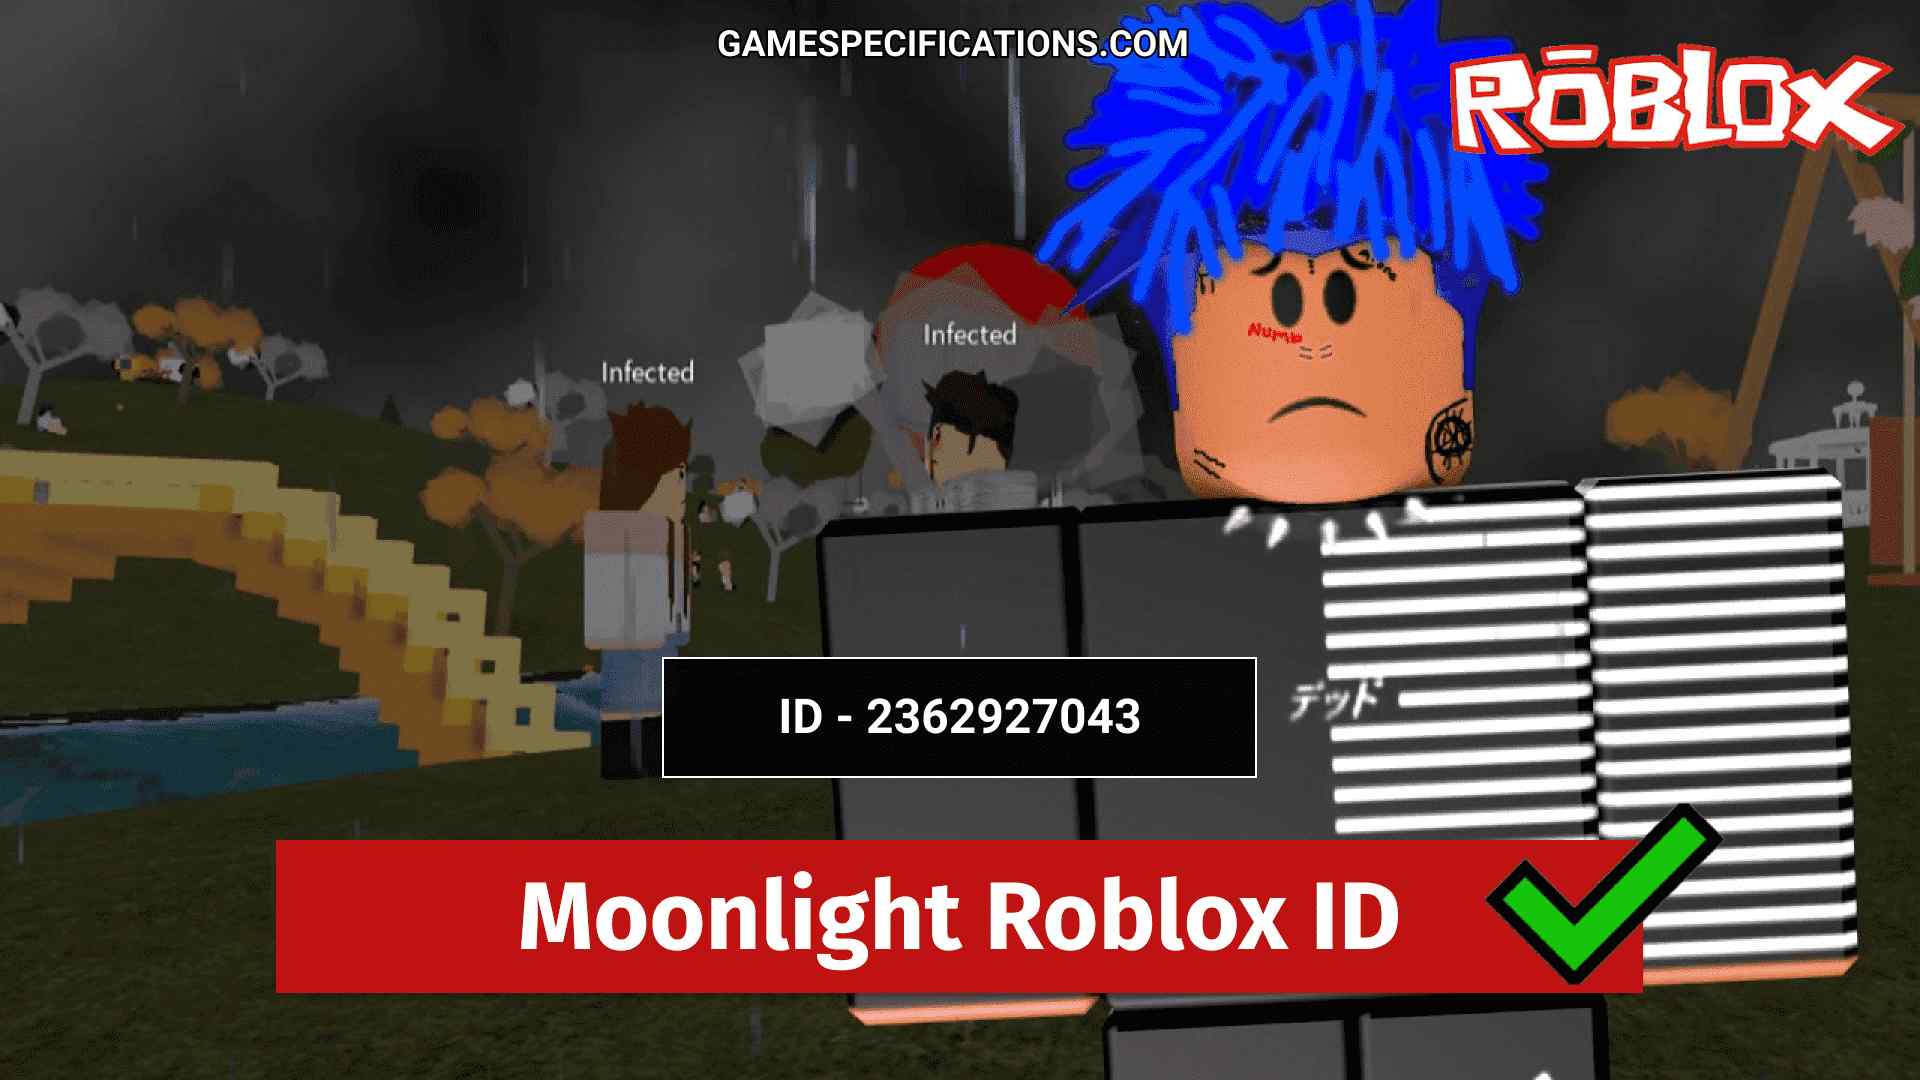 Roblox Id Codes 2021 : RARE BYPASSED ROBLOX ID's 2020-2021 *WORKS